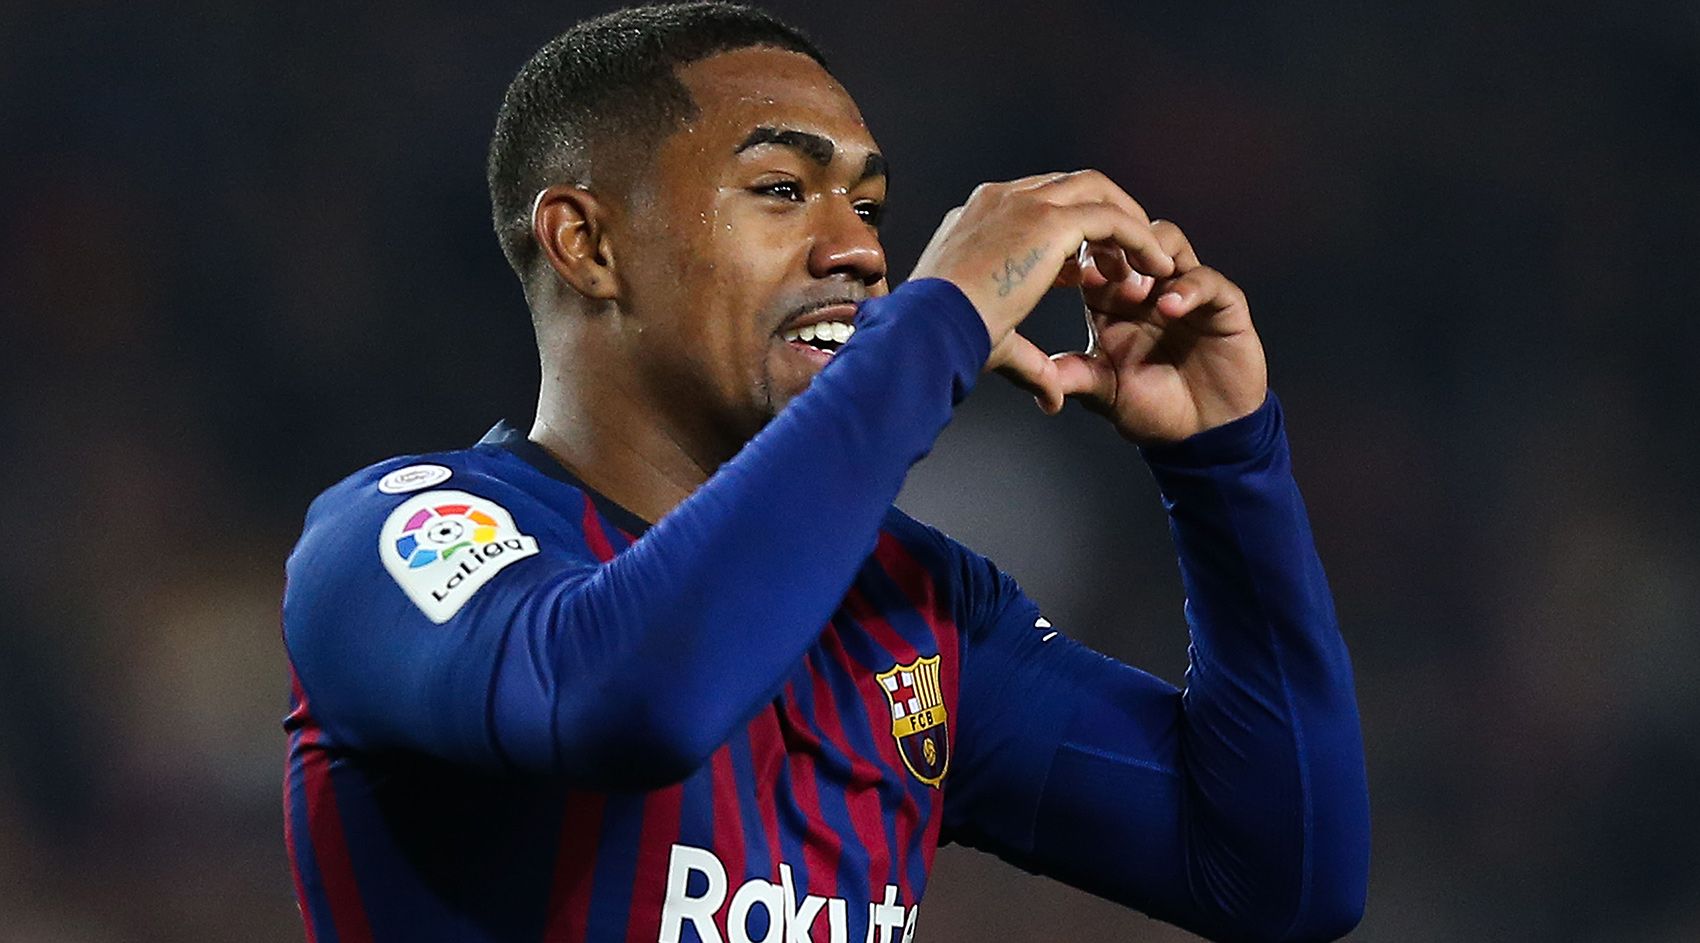 Malcom, during a match with FC Barcelona